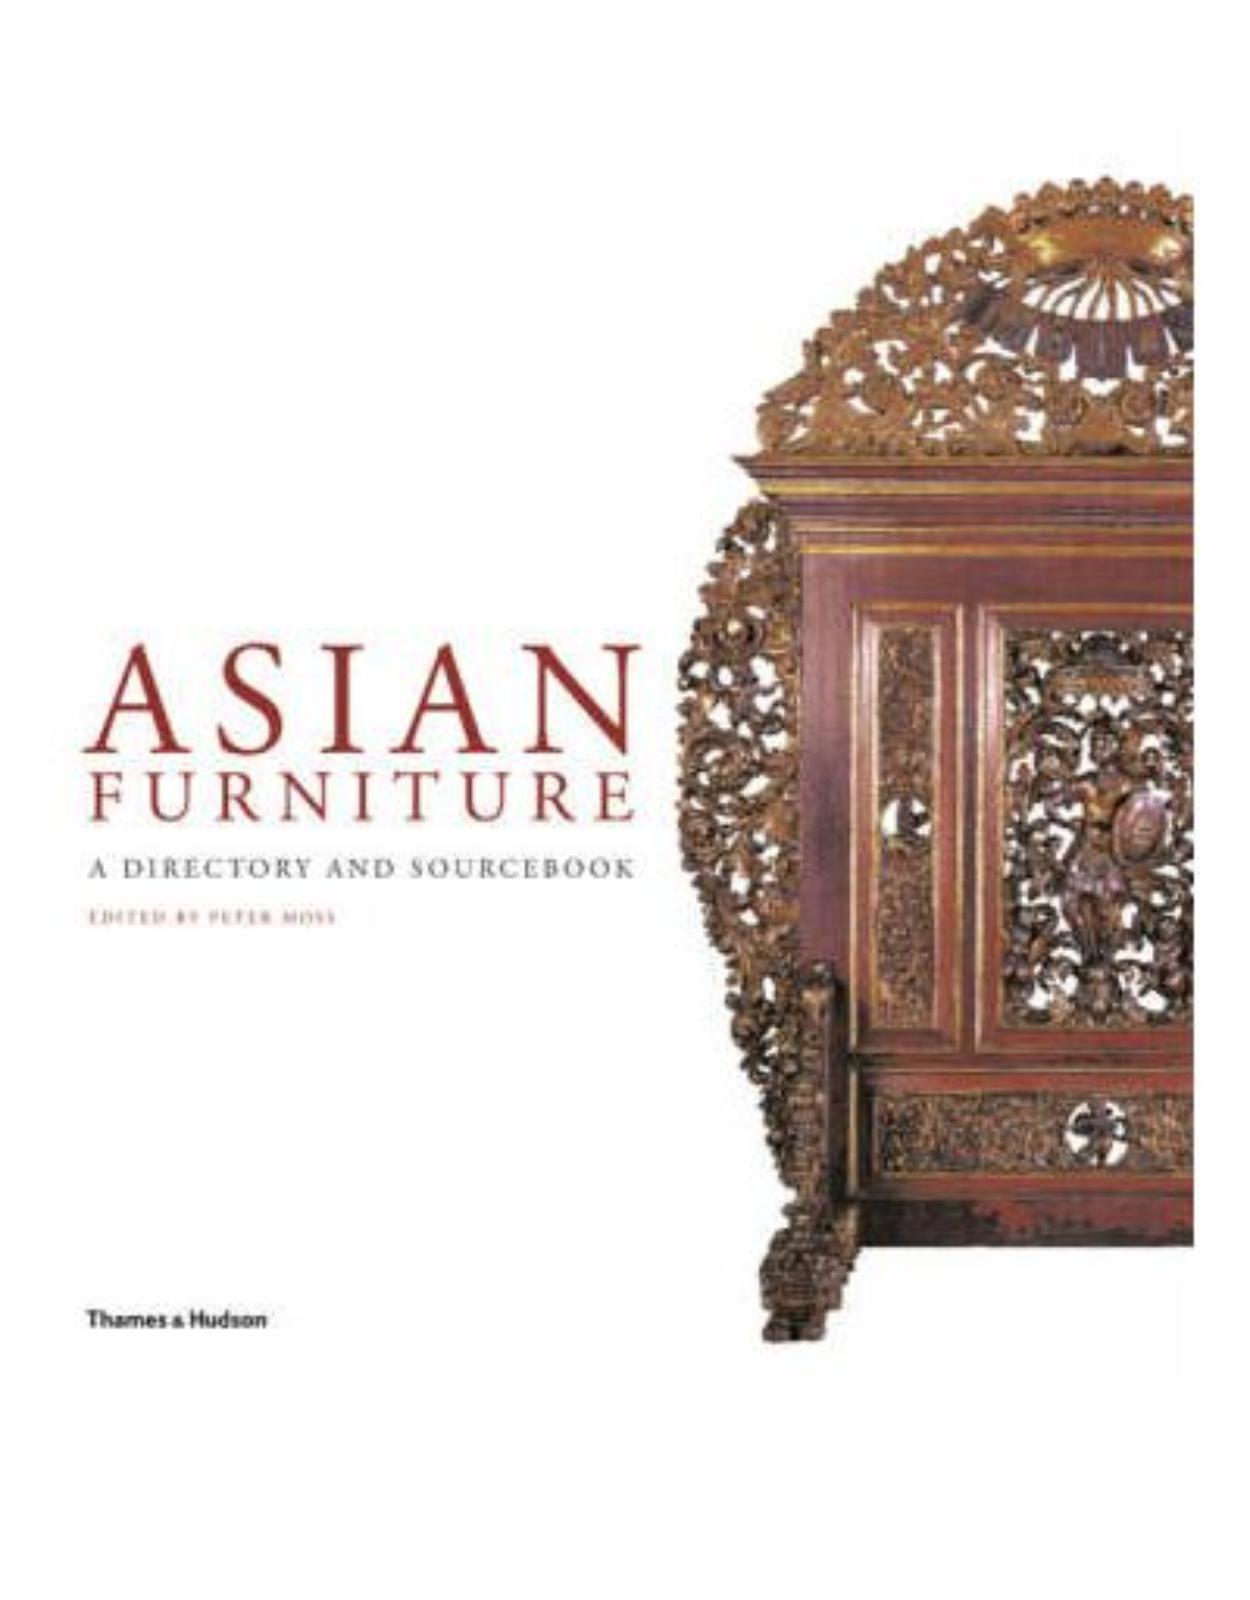 Asian Furniture: A Directory and Sourcebook